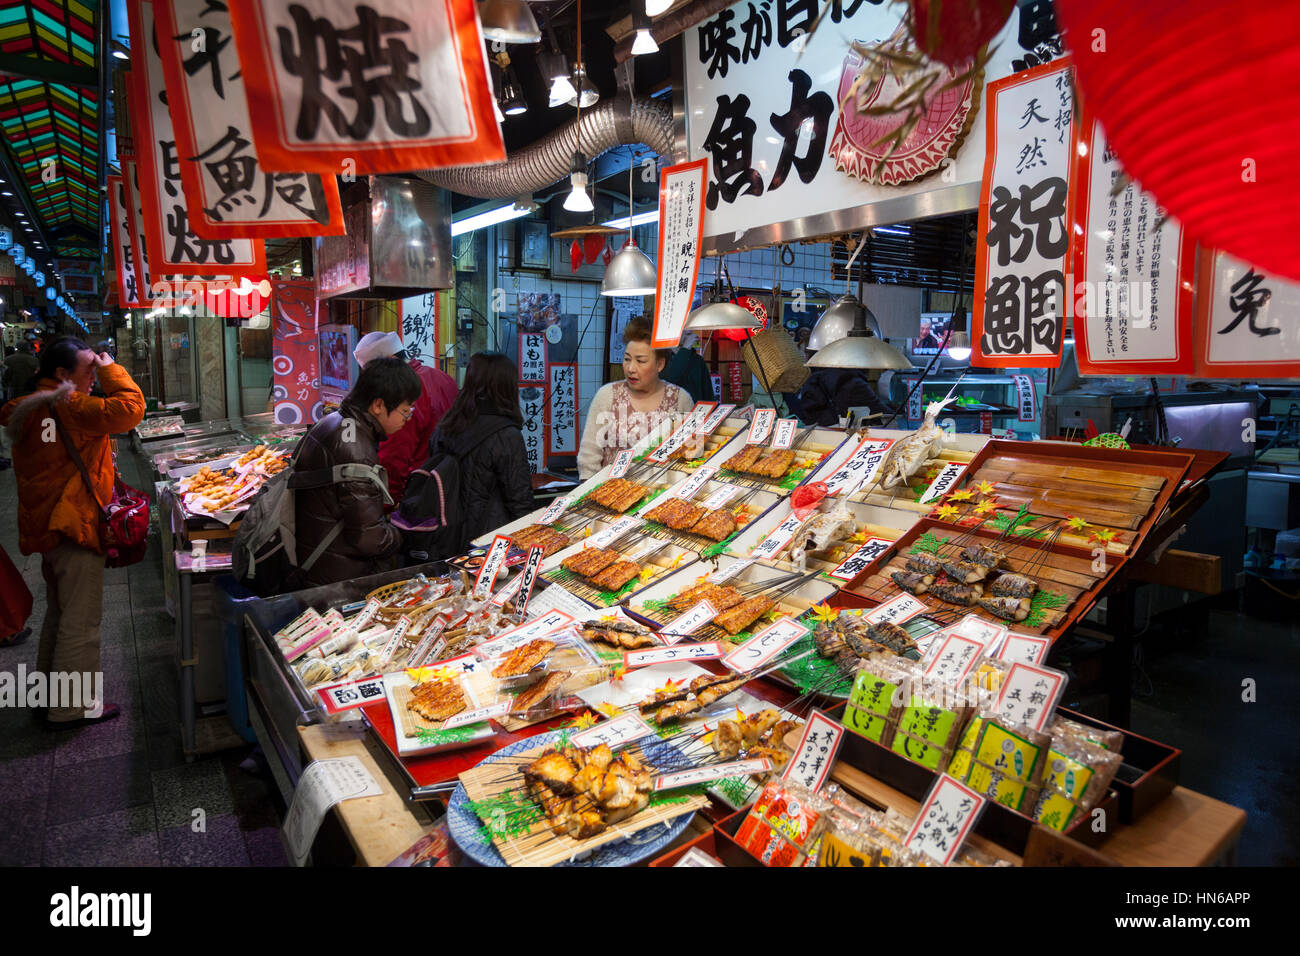 KYOTO, JAPAN - MARCH 23: Staff and customers at a stall selling cooked fish in Nishiki food market in Central Kyoto on 23rd March 2012. Stock Photo